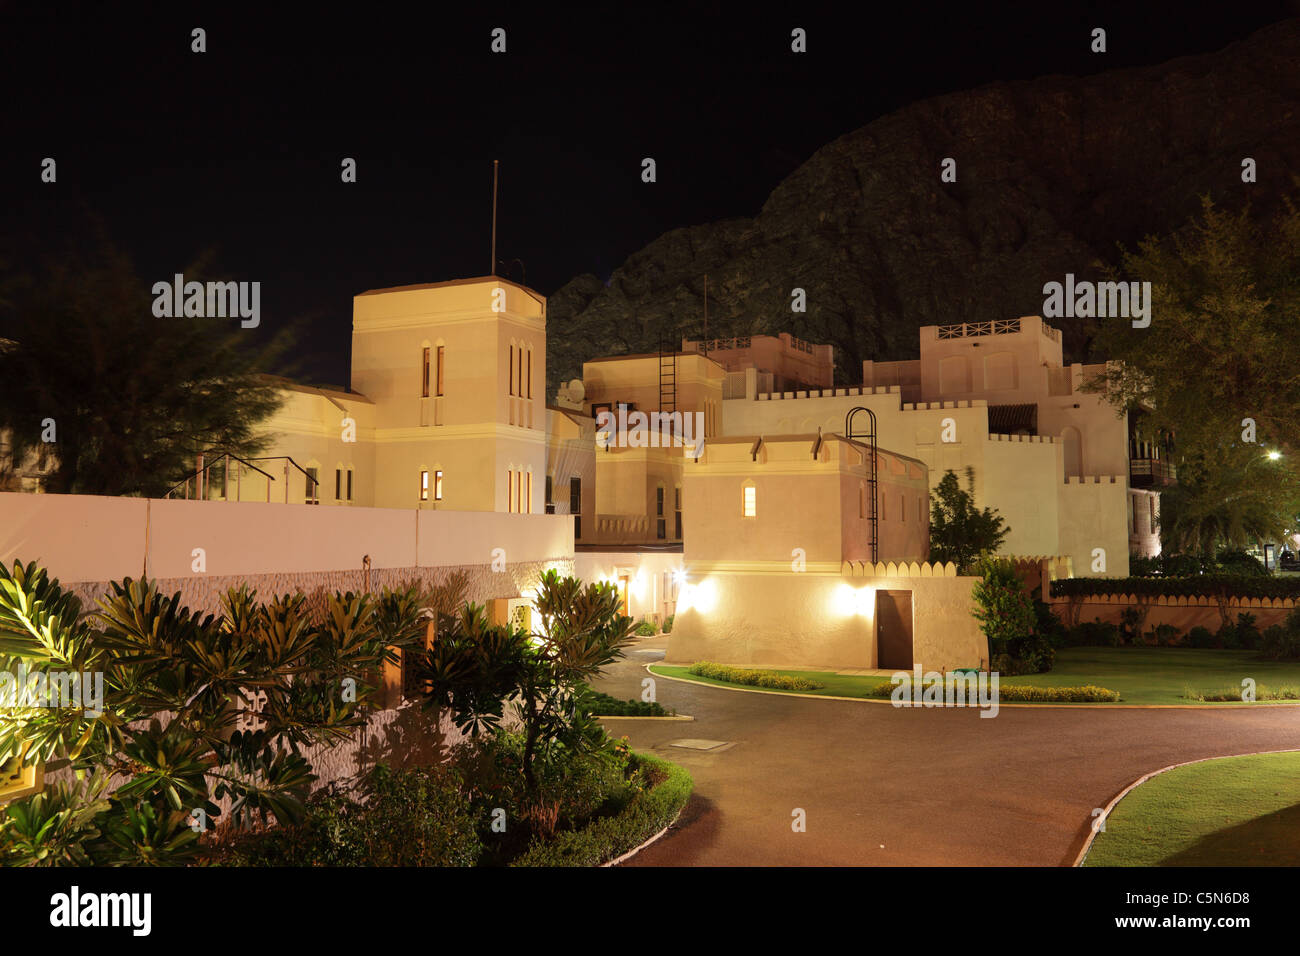 Residential buildings at night, Sultanate of Oman Stock Photo